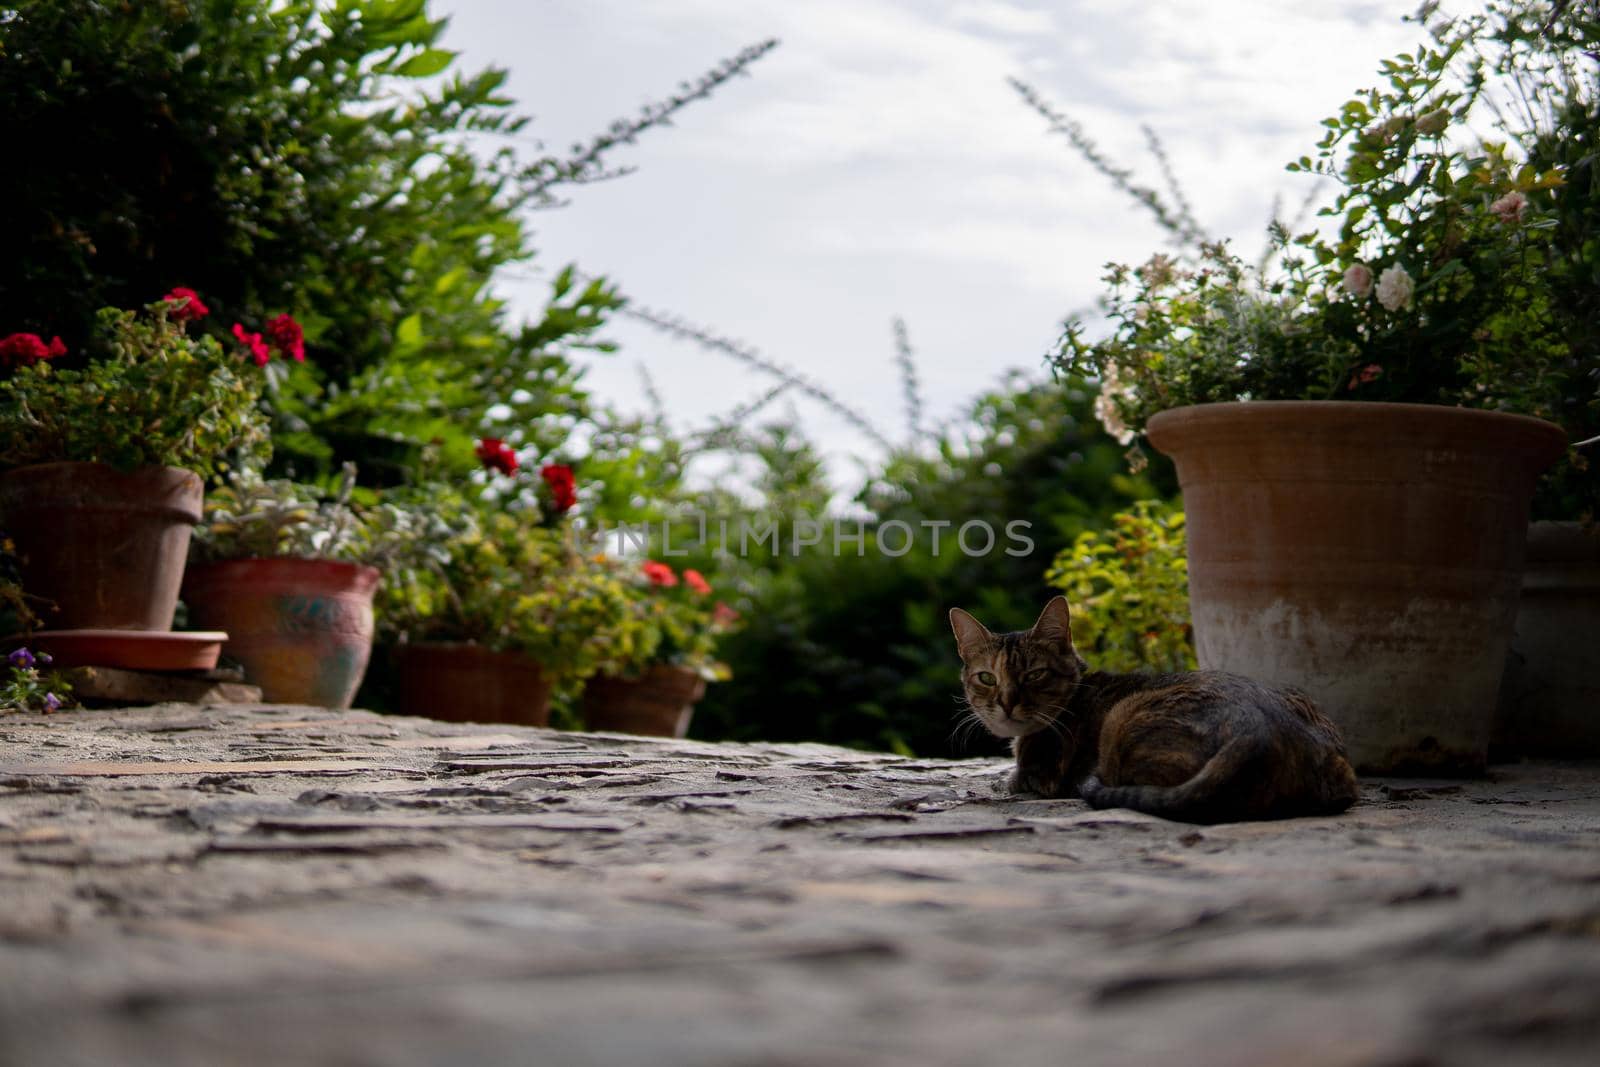 Kitten lying down and surrounded by plants by xavier_photo